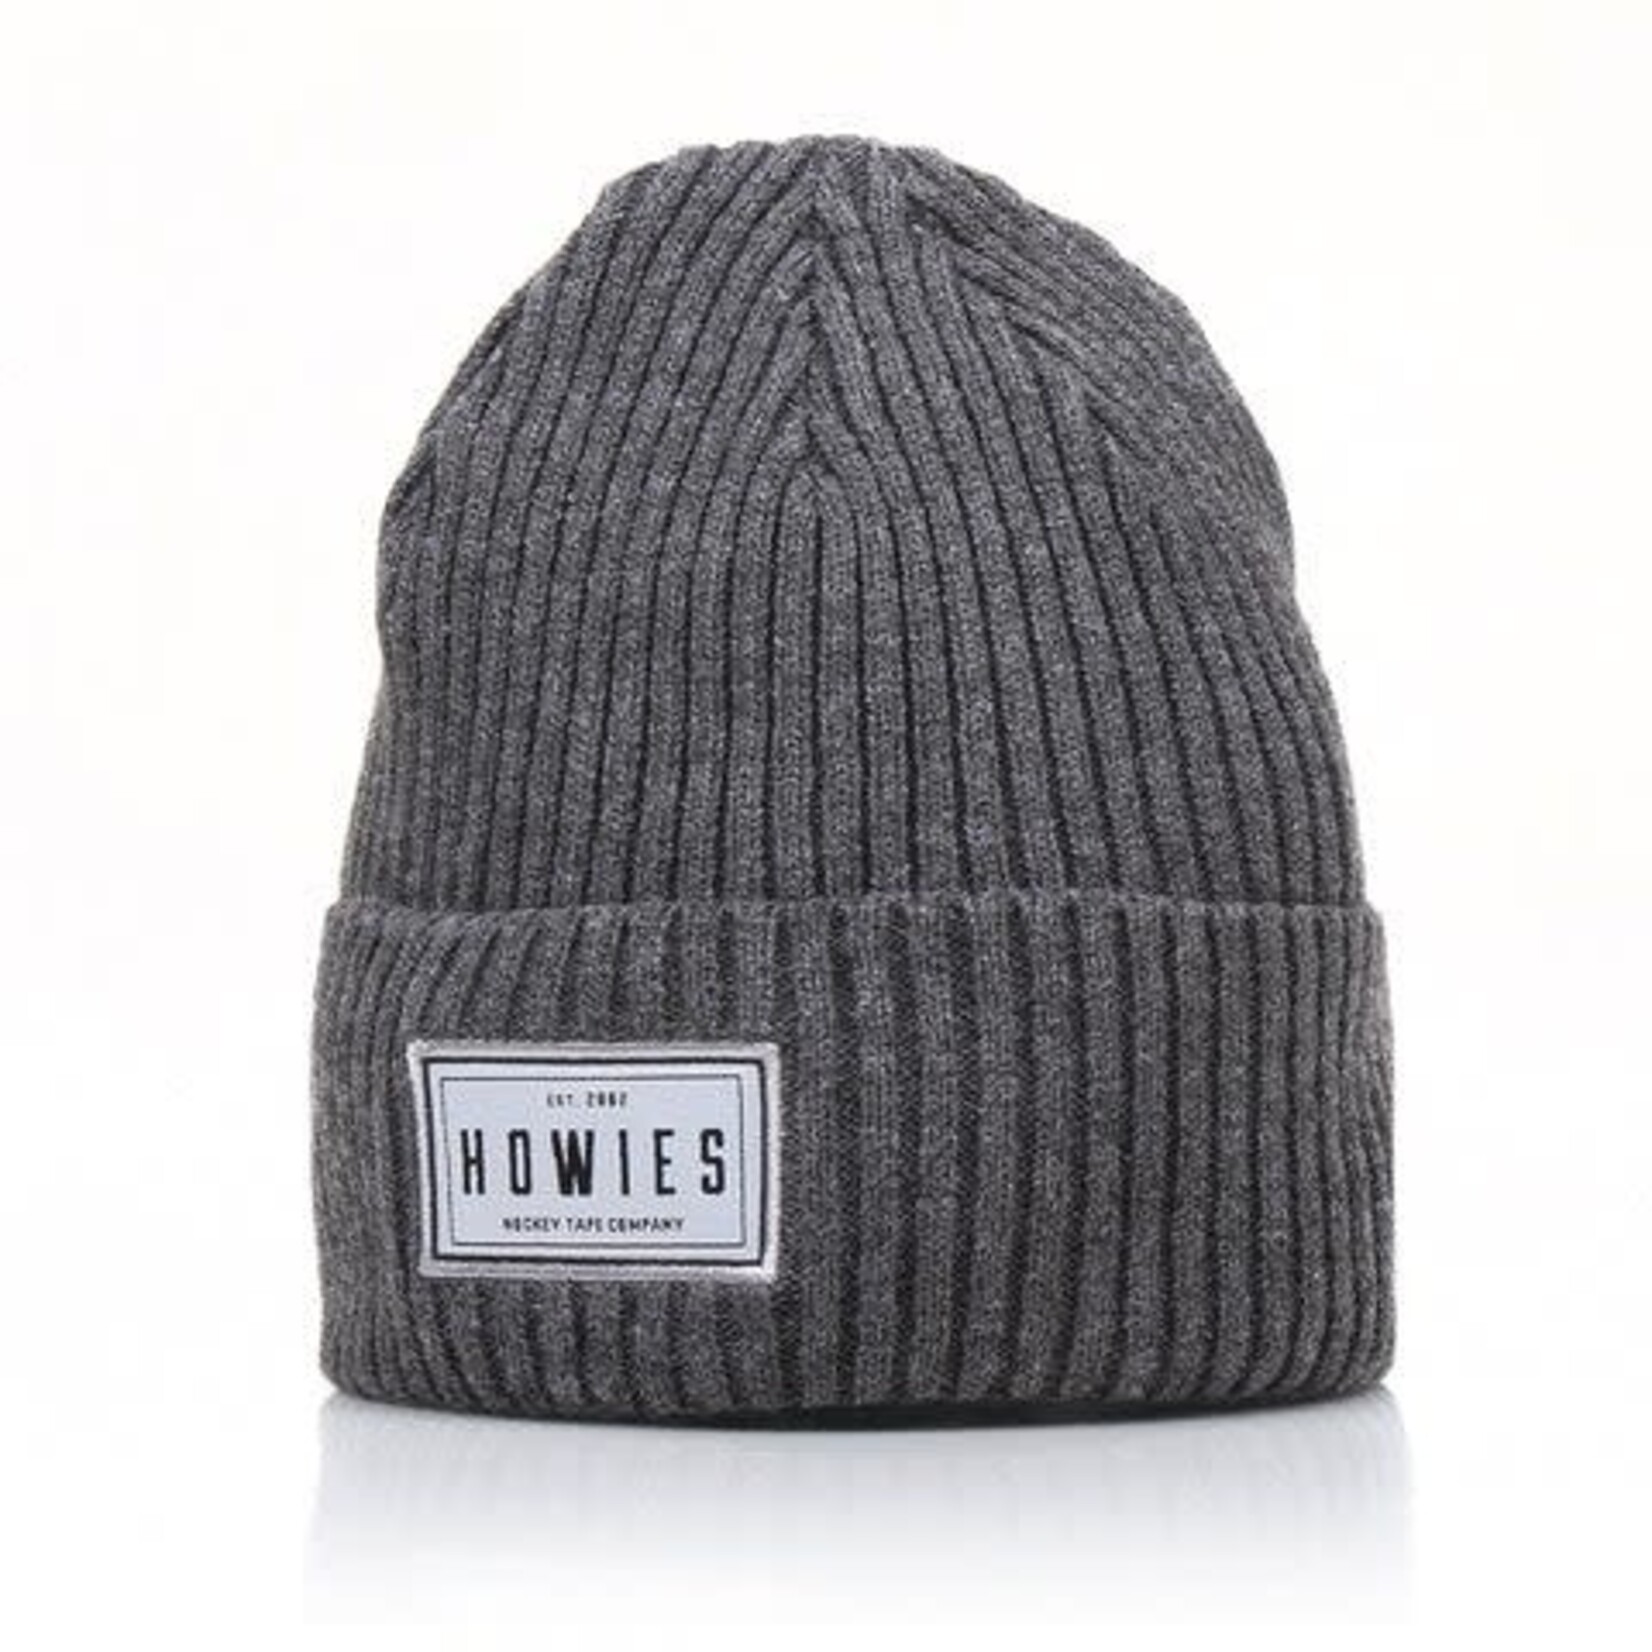 Howies Howies Toque Game Day Beanie (GRAY)